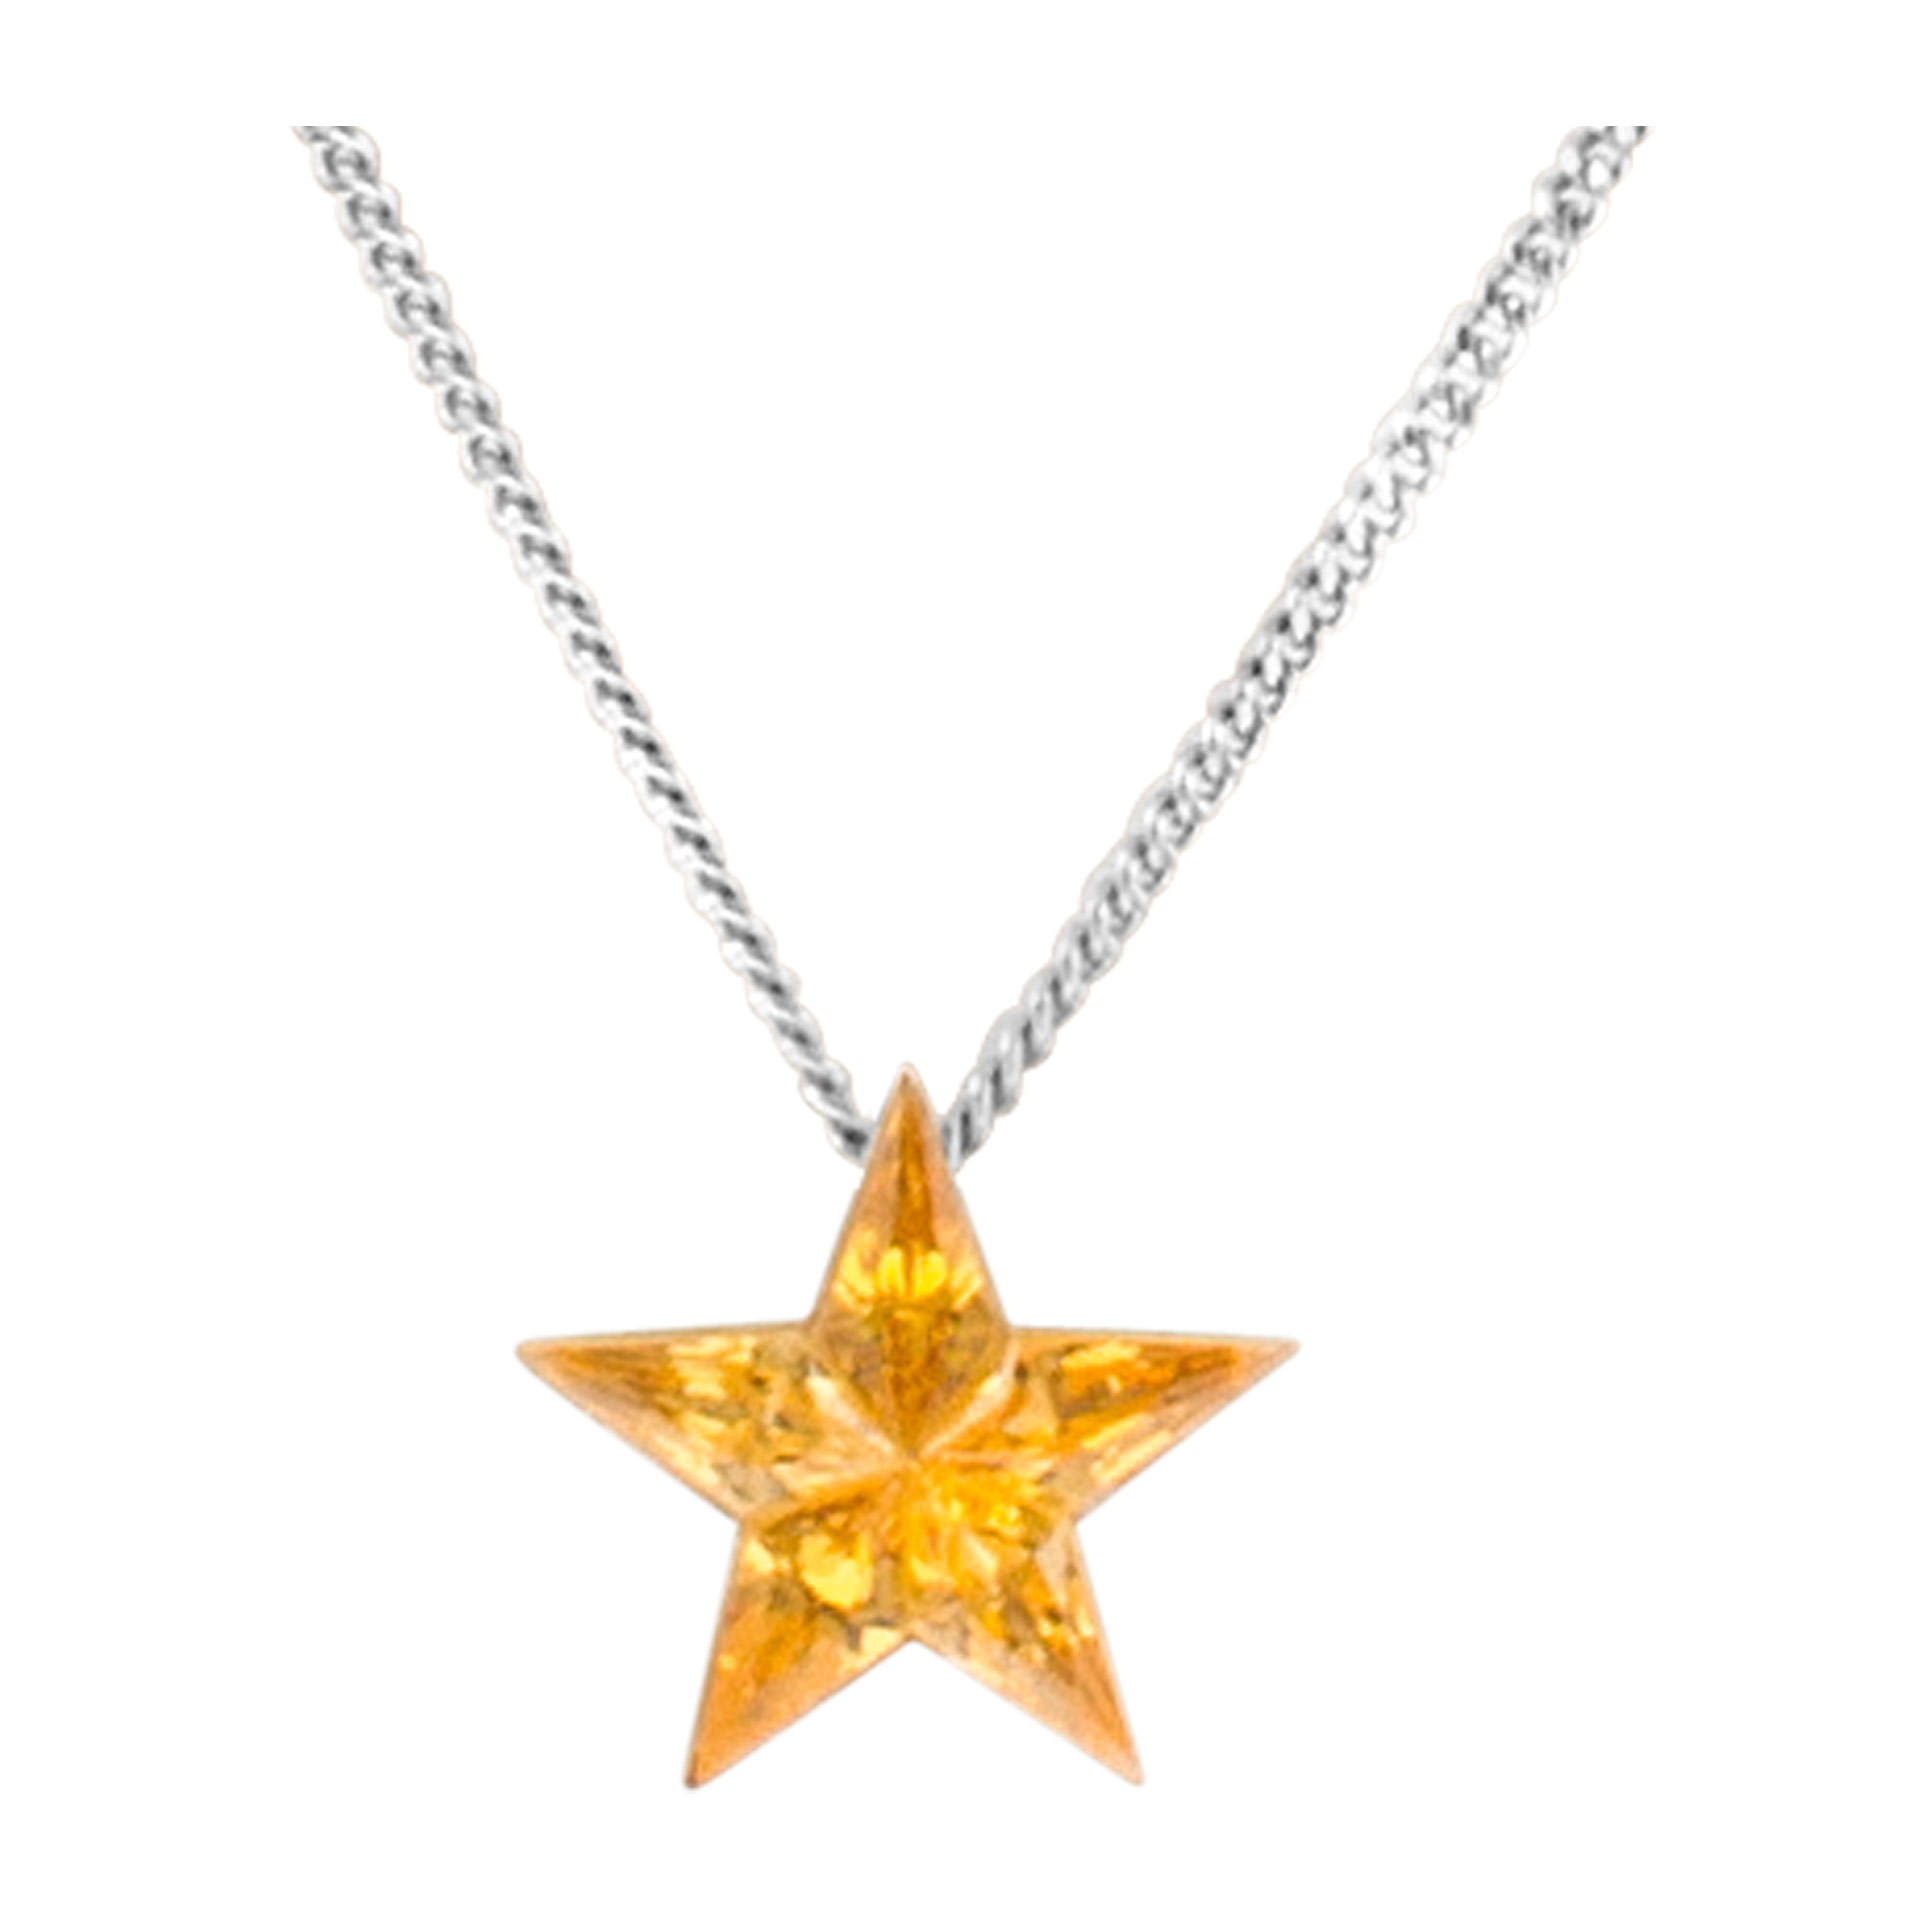 Yellow star sapphire necklace in 18K white gold